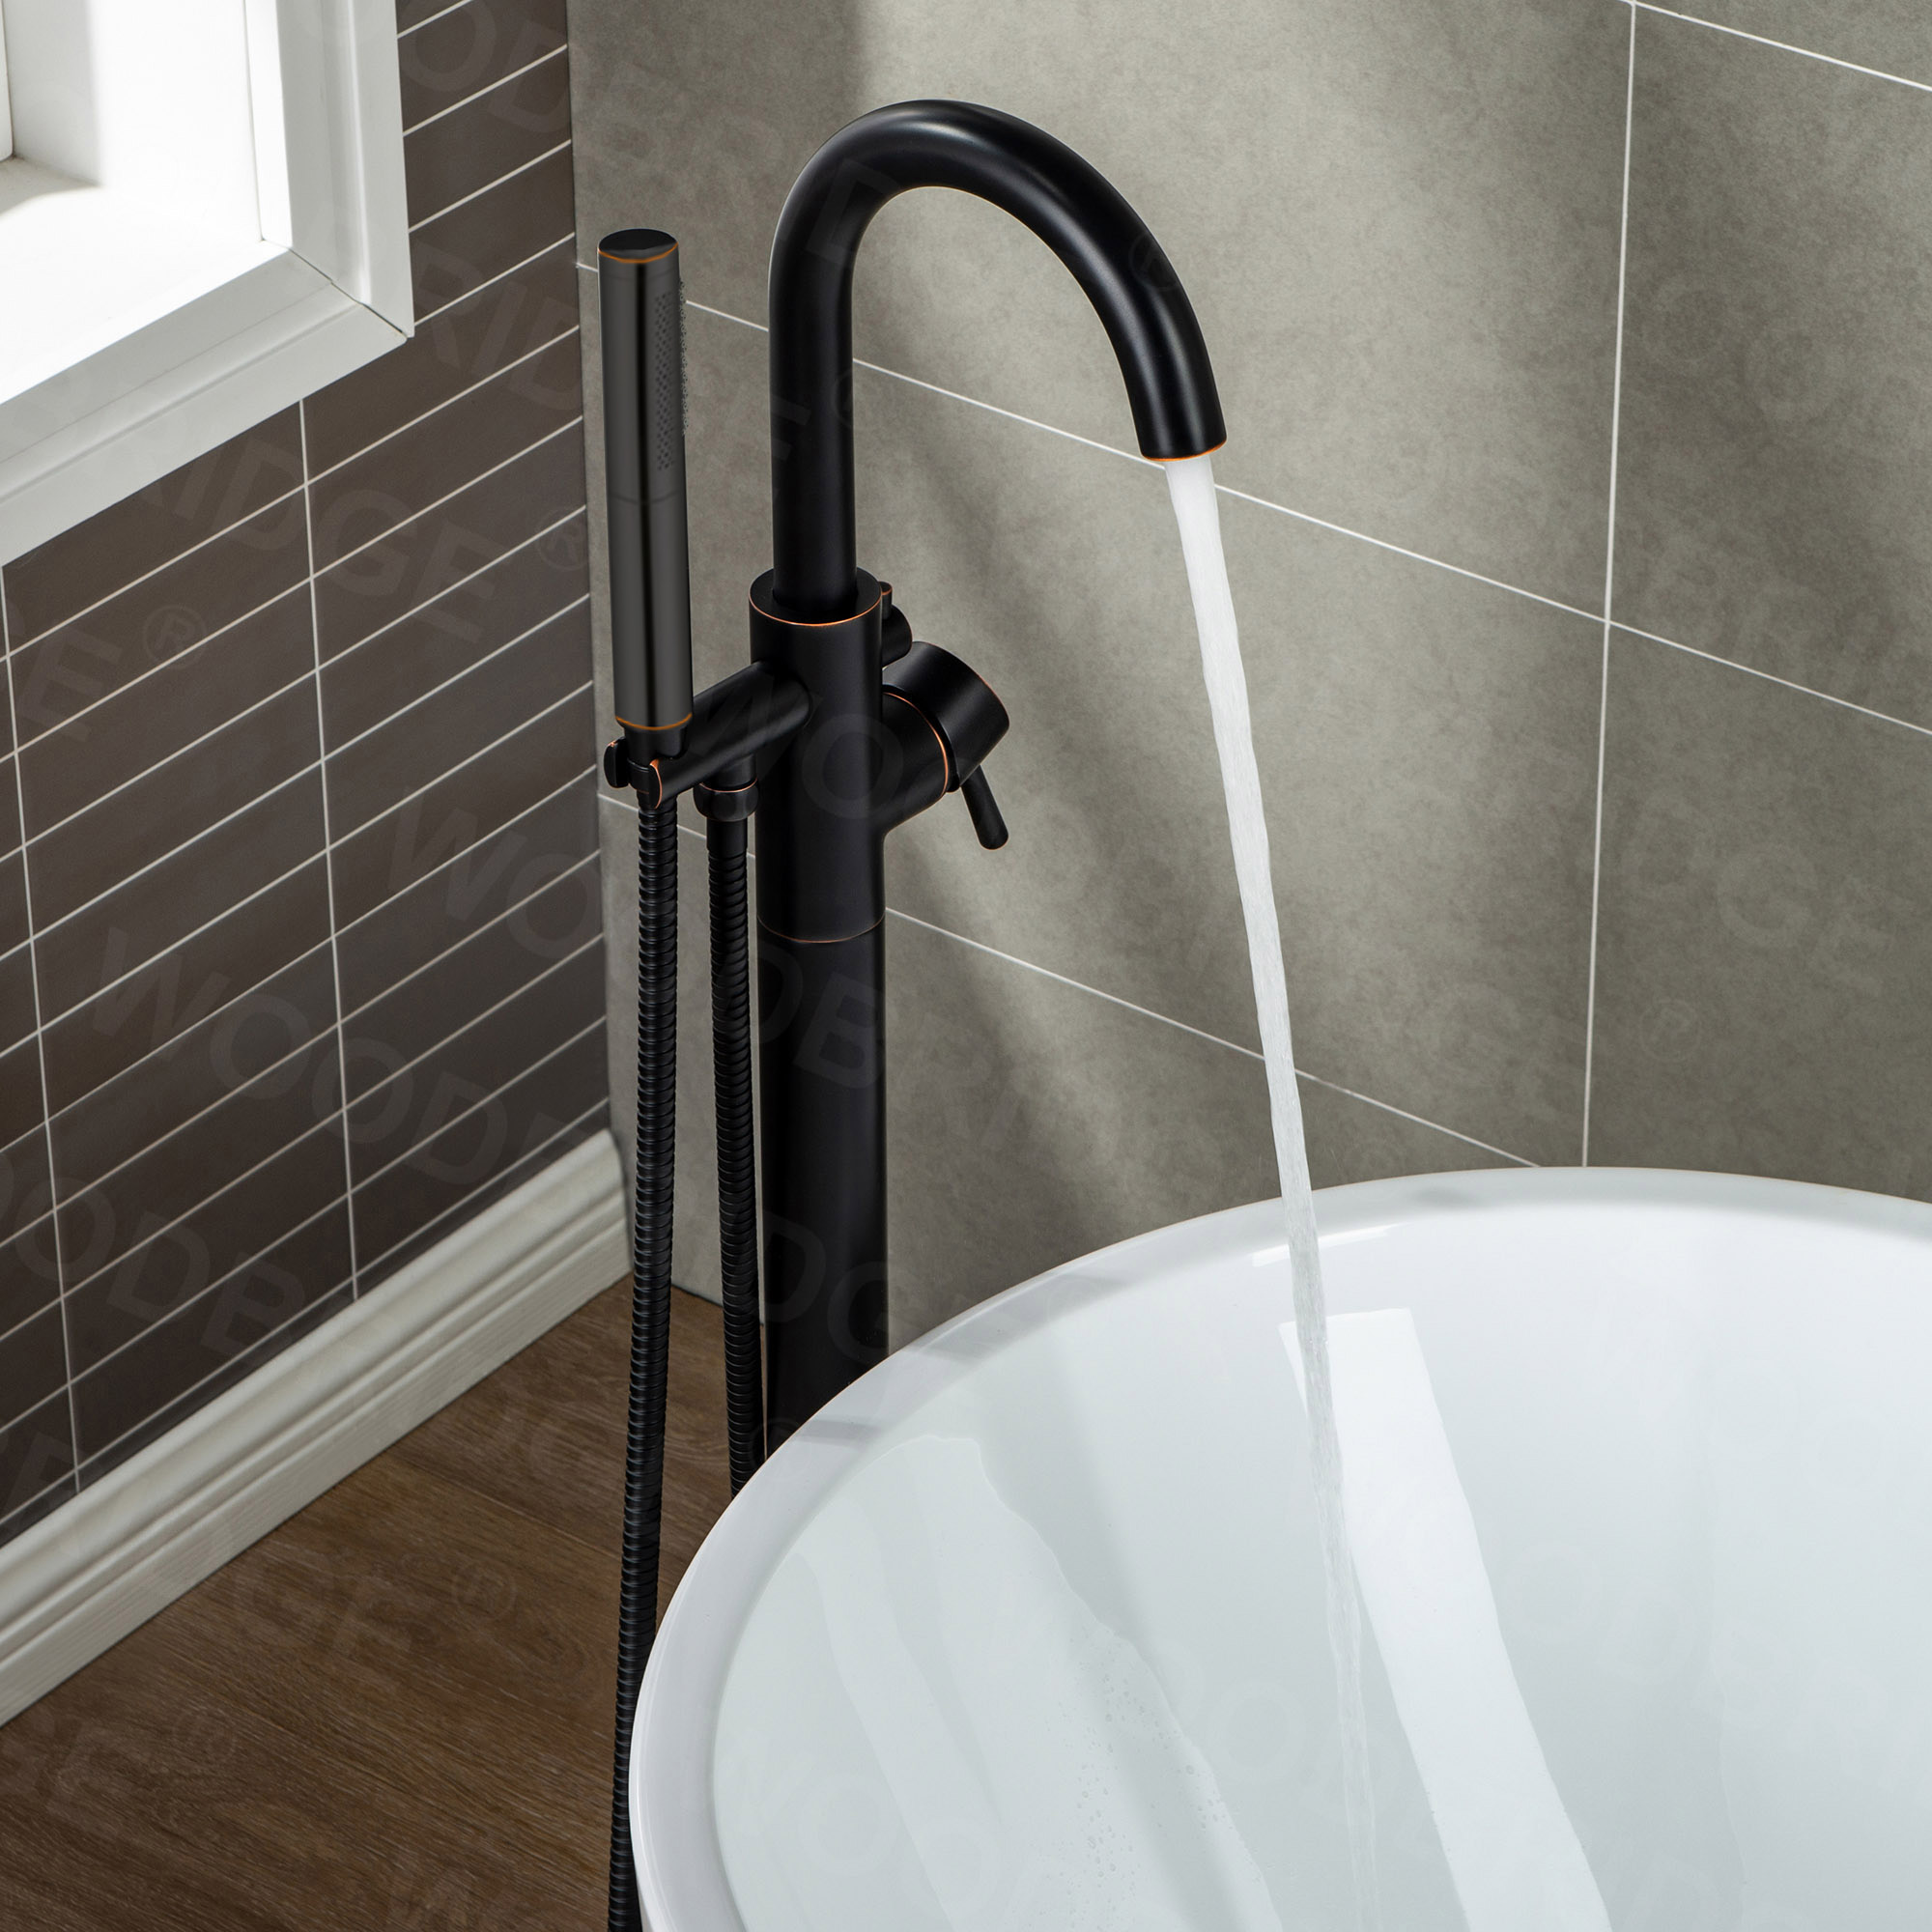  WOODBRIDGE F0010ORBDR Contemporary Single Handle Floor Mount Freestanding Tub Filler Faucet with Hand shower in Oil Rubbed Bronze Finish._14275